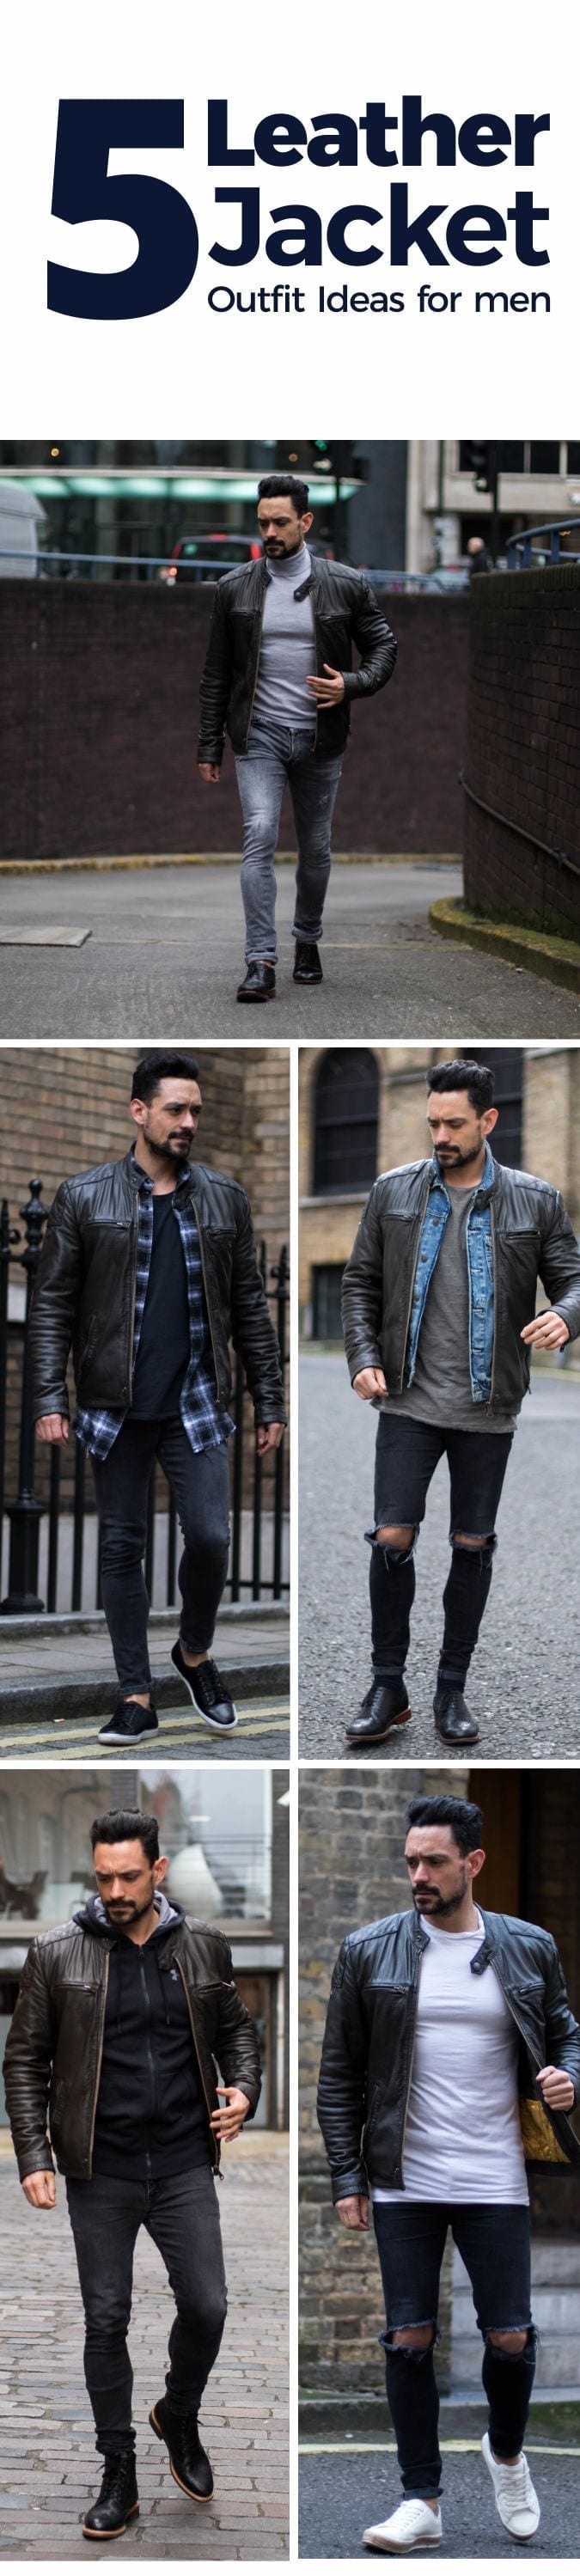 5 leather jacket outfits ideas for men